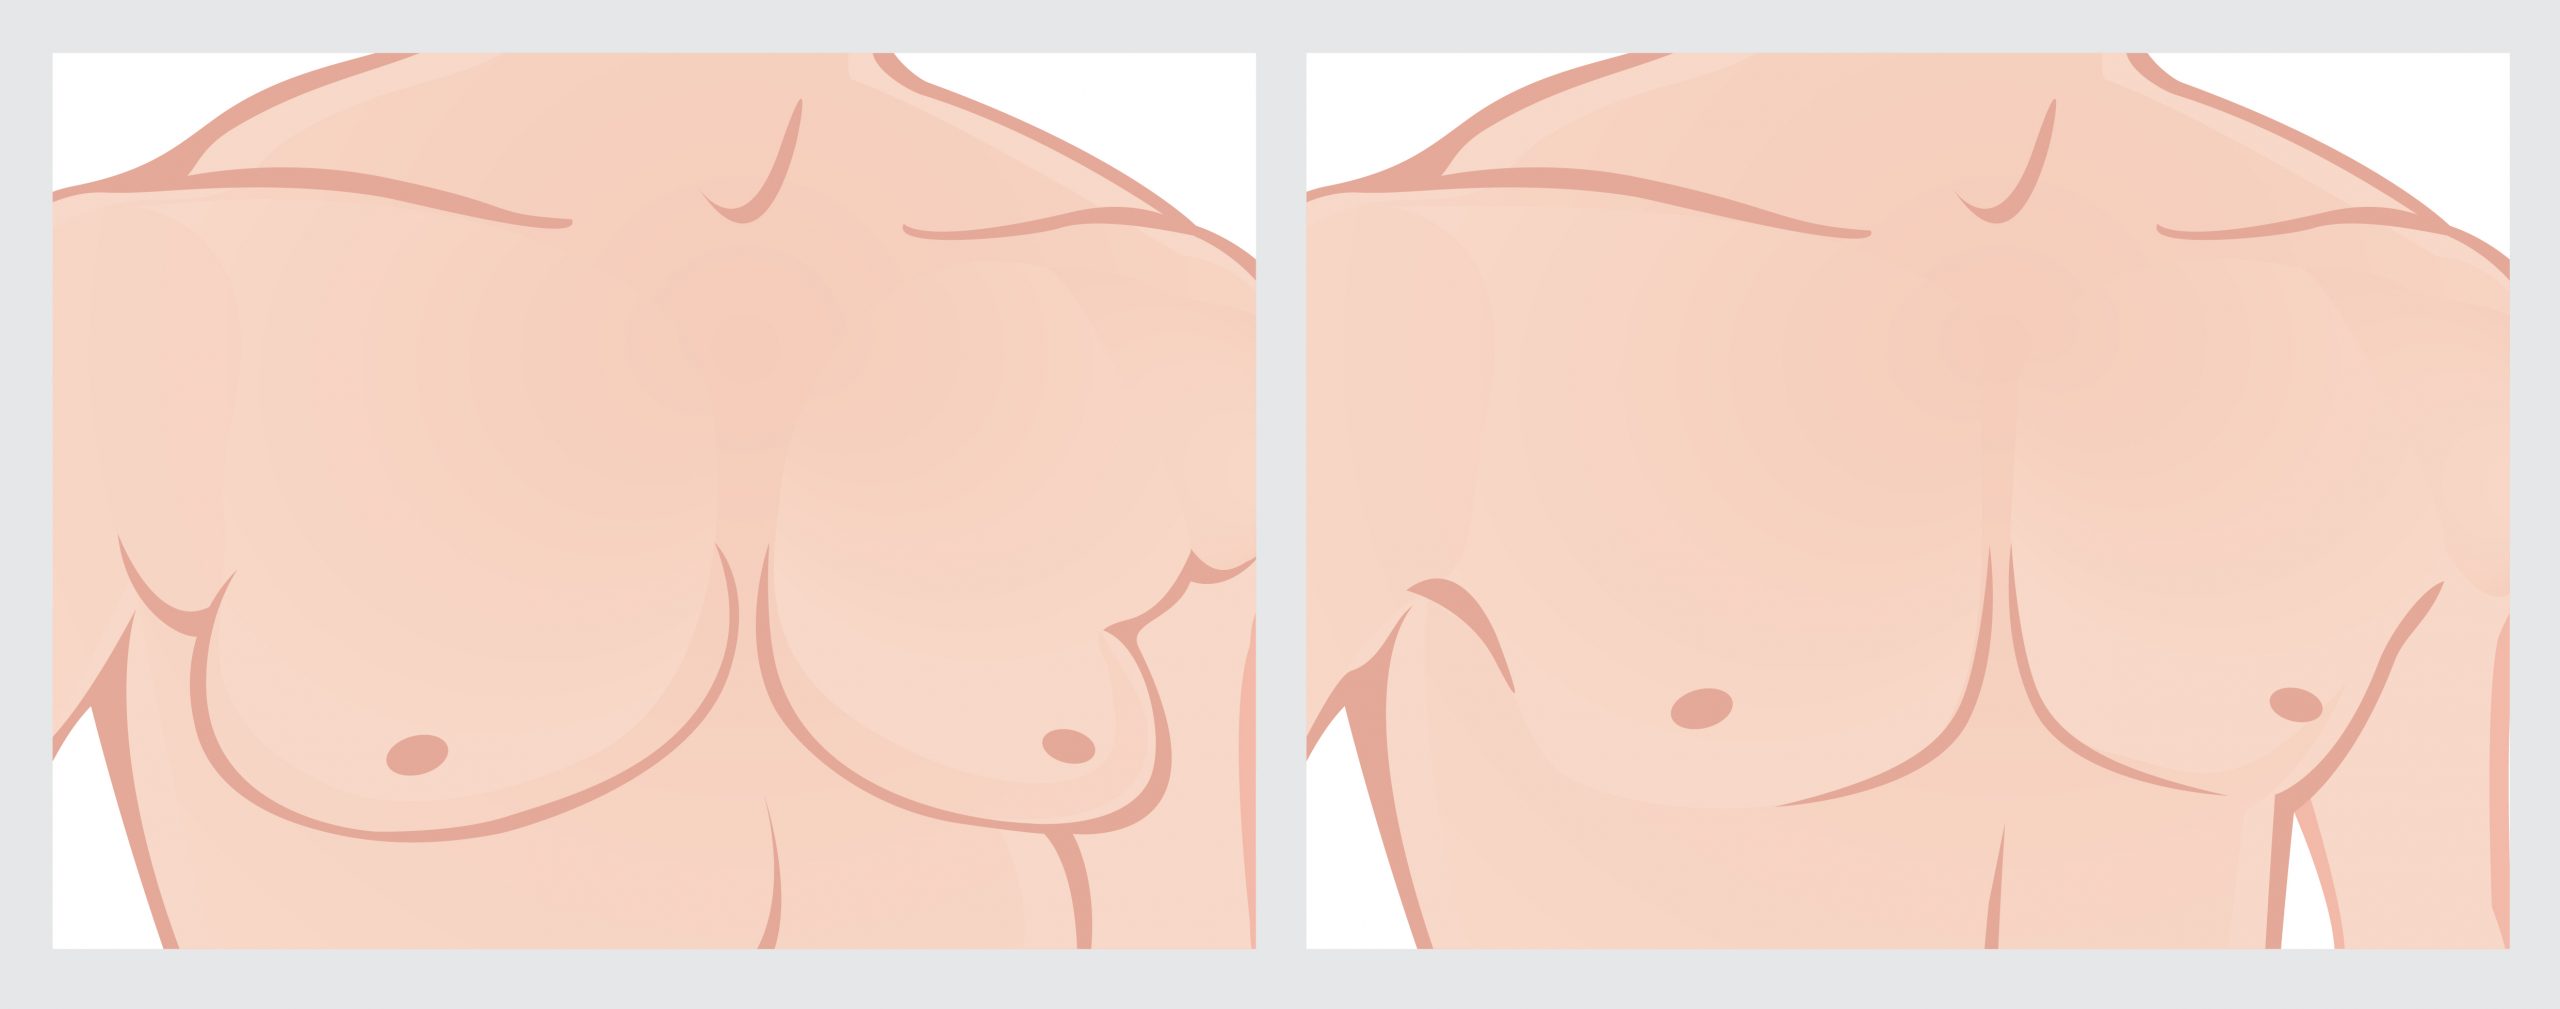 breast reduction surgery